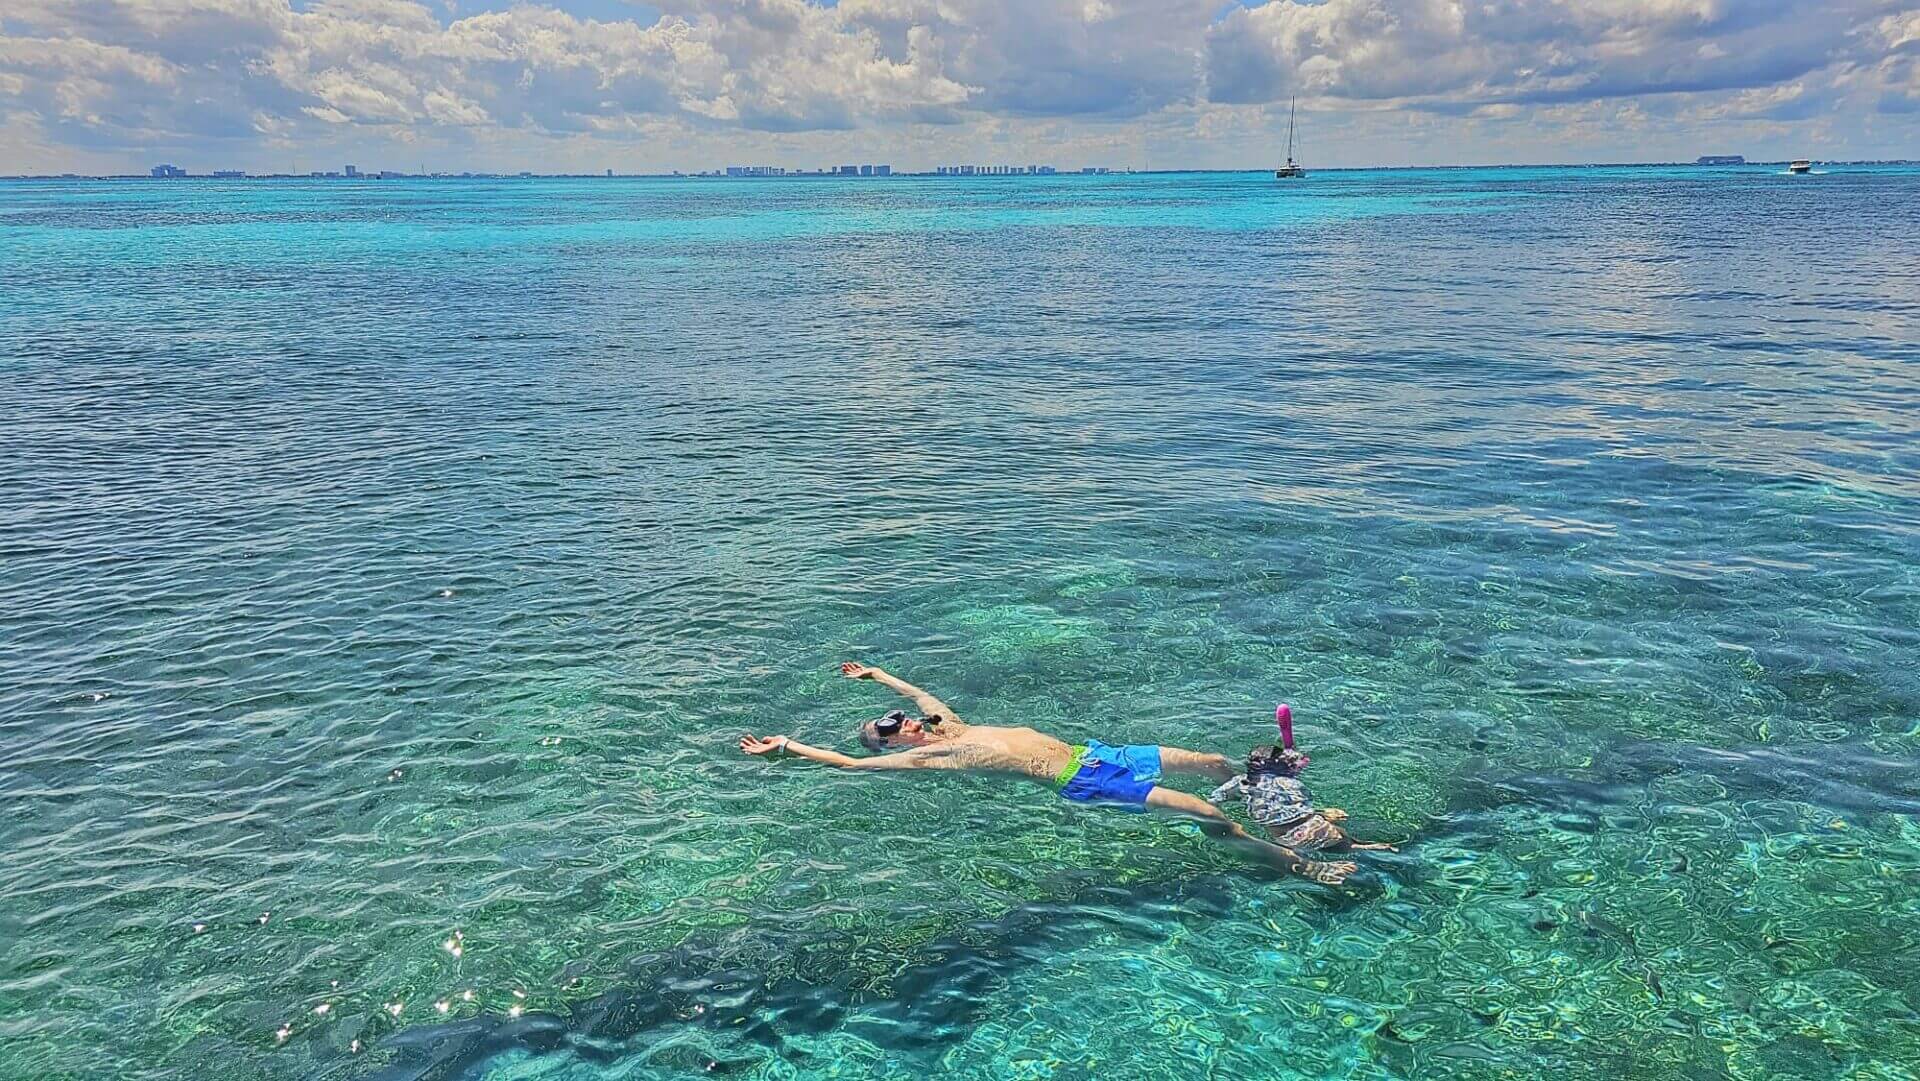 A snorkeler floating on the clear waters of Playa del Carmen, Riviera Maya, with distant views of the coastline.